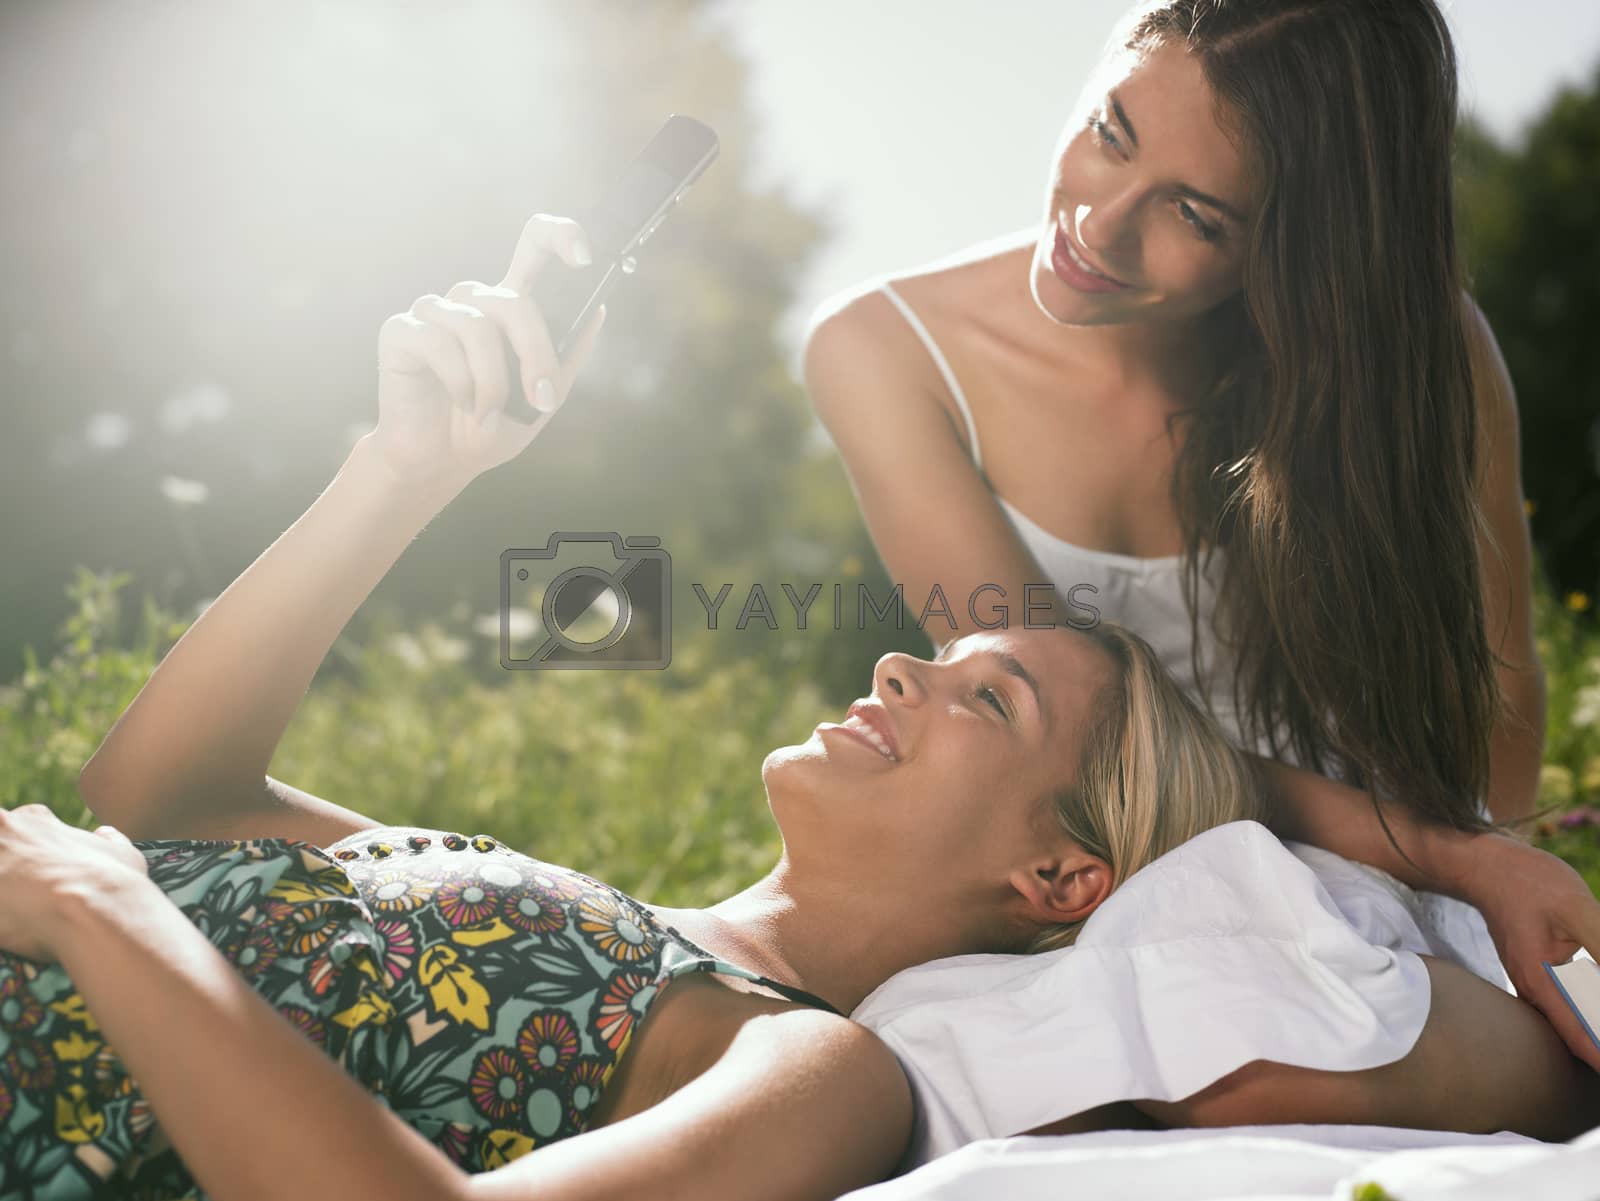 Royalty free image of Two women sitting in meadow using mobile phone by moodboard